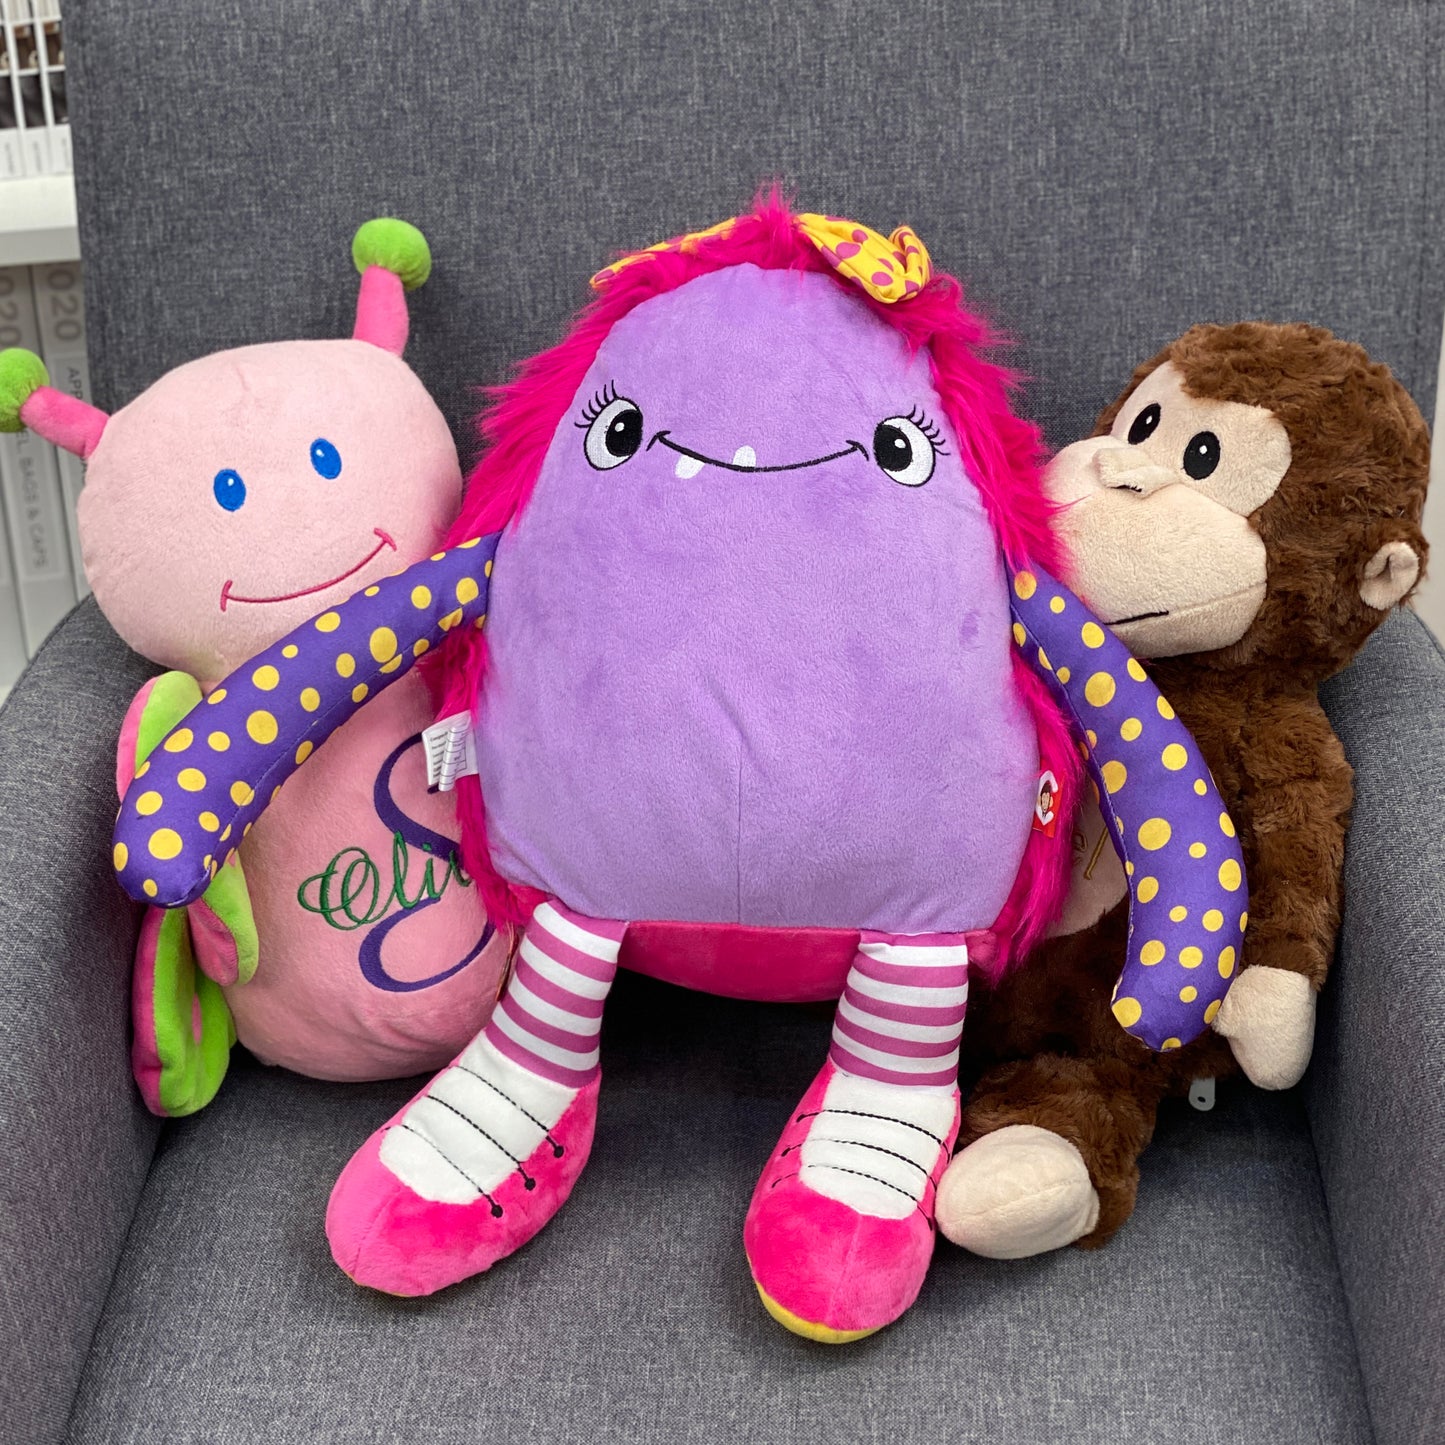 Personalized Stuffed Pink and Purple Monster